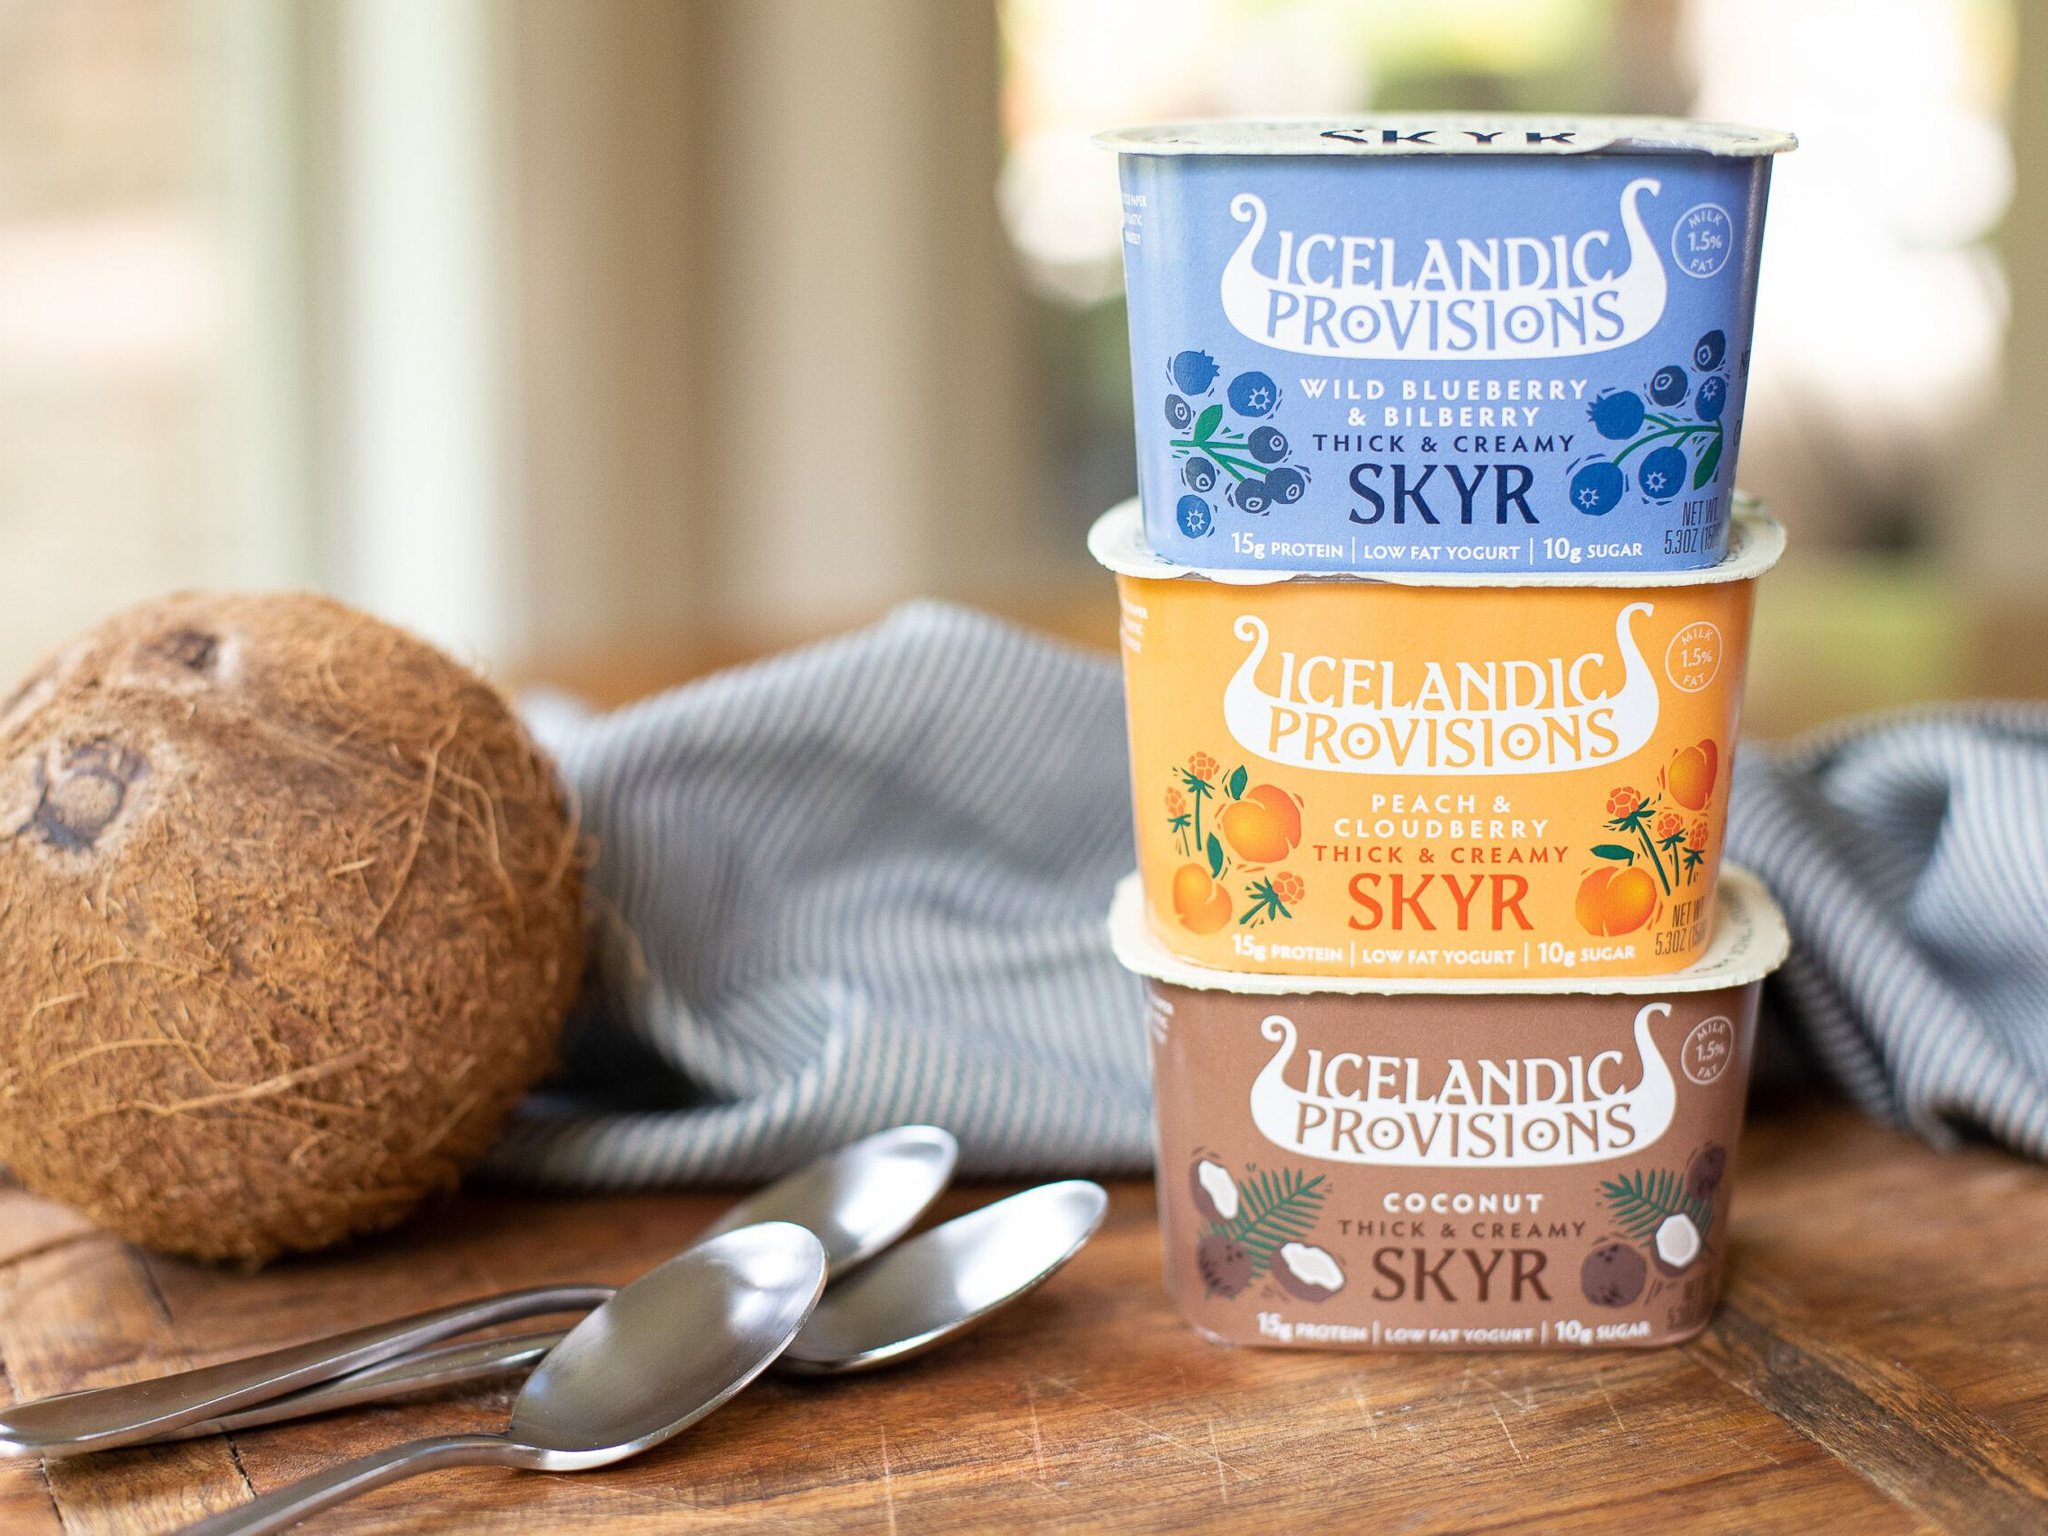 Icelandic Provisions Skyr As Low As 40¢ At Publix